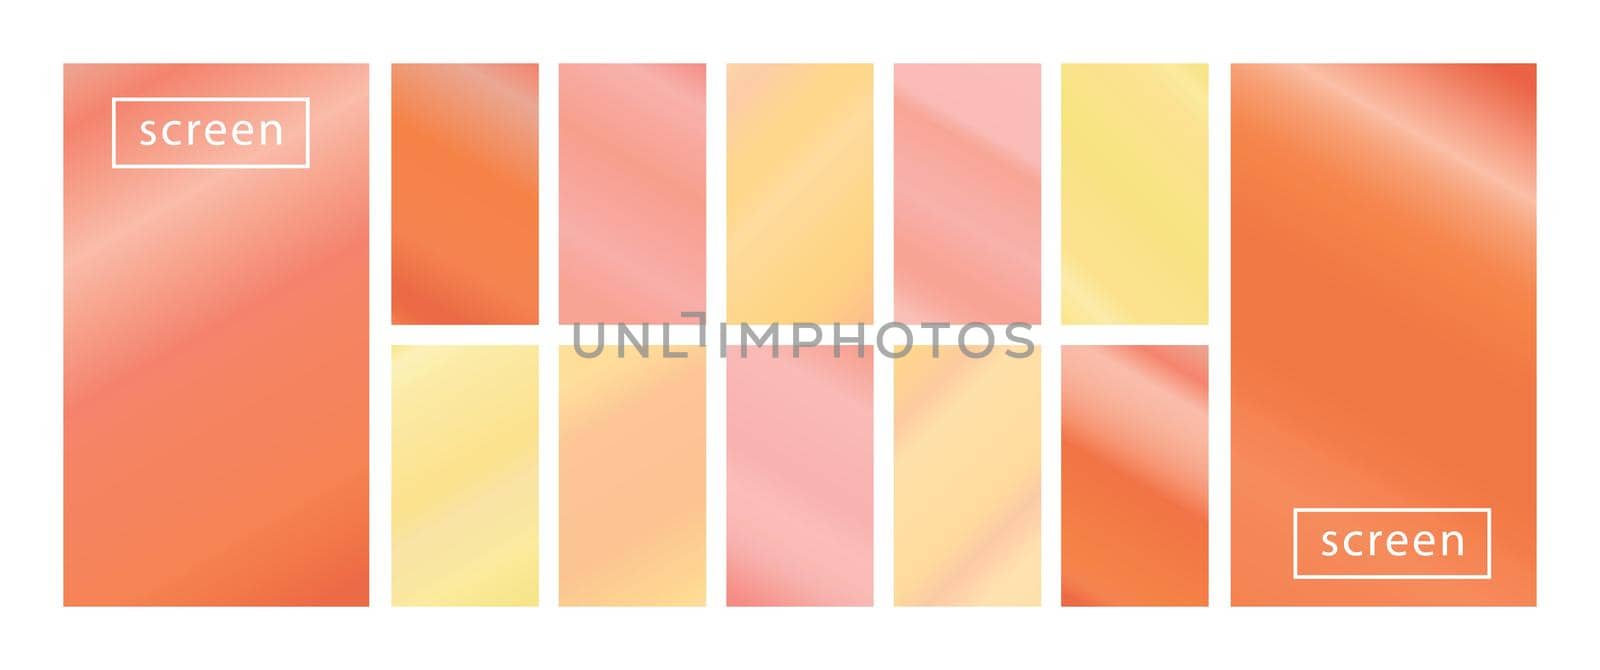 Mobile screen lock display collection of colorful backgrounds in trendy neon colors. Modern screen vector design for mobile app. Soft color abstract pastel holographic gradients. Swatches for design.